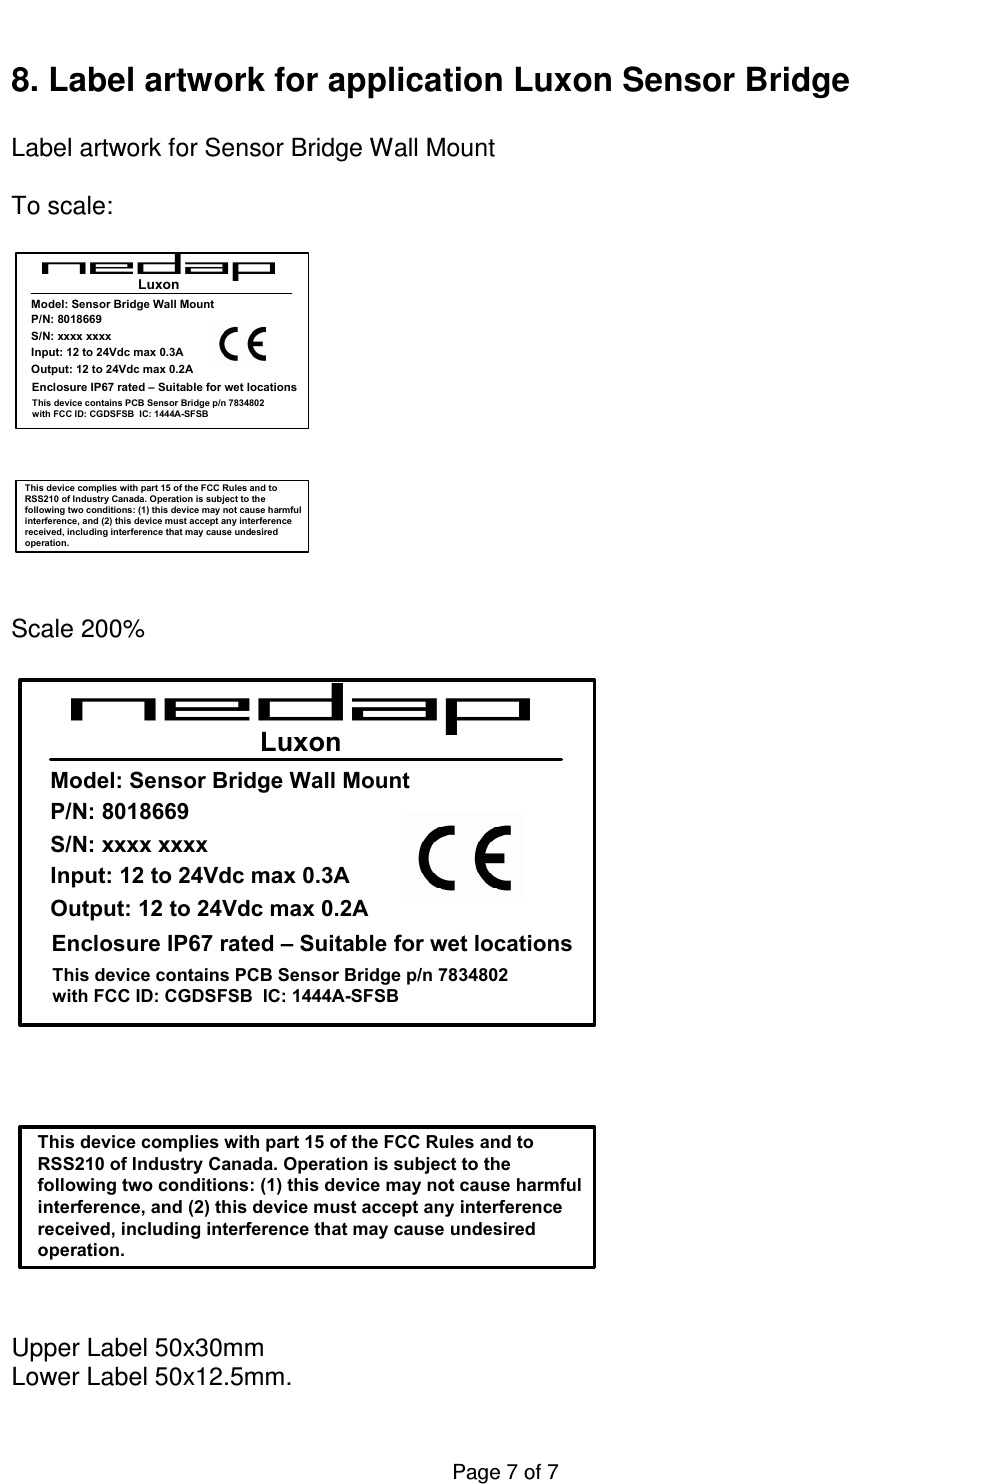   Page 7 of 7    8. Label artwork for application Luxon Sensor Bridge   Label artwork for Sensor Bridge Wall Mount  To scale:  This device complies with part 15 of the FCC Rules and to RSS210 of Industry Canada. Operation is subject to the following two conditions: (1) this device may not cause harmful interference, and (2) this device must accept any interference received, including interference that may cause undesired operation.LuxonP/N: 8018669Input: 12 to 24Vdc max 0.3AEnclosure IP67 rated – Suitable for wet locationsModel: Sensor Bridge Wall Mount     This device contains PCB Sensor Bridge p/n 7834802 with FCC ID: CGDSFSB  IC: 1444A-SFSBS/N: xxxx xxxxOutput: 12 to 24Vdc max 0.2A   Scale 200%  This device complies with part 15 of the FCC Rules and to RSS210 of Industry Canada. Operation is subject to the following two conditions: (1) this device may not cause harmful interference, and (2) this device must accept any interference received, including interference that may cause undesired operation.LuxonP/N: 8018669Input: 12 to 24Vdc max 0.3AEnclosure IP67 rated – Suitable for wet locationsModel: Sensor Bridge Wall Mount     This device contains PCB Sensor Bridge p/n 7834802 with FCC ID: CGDSFSB  IC: 1444A-SFSBS/N: xxxx xxxxOutput: 12 to 24Vdc max 0.2A   Upper Label 50x30mm Lower Label 50x12.5mm.  